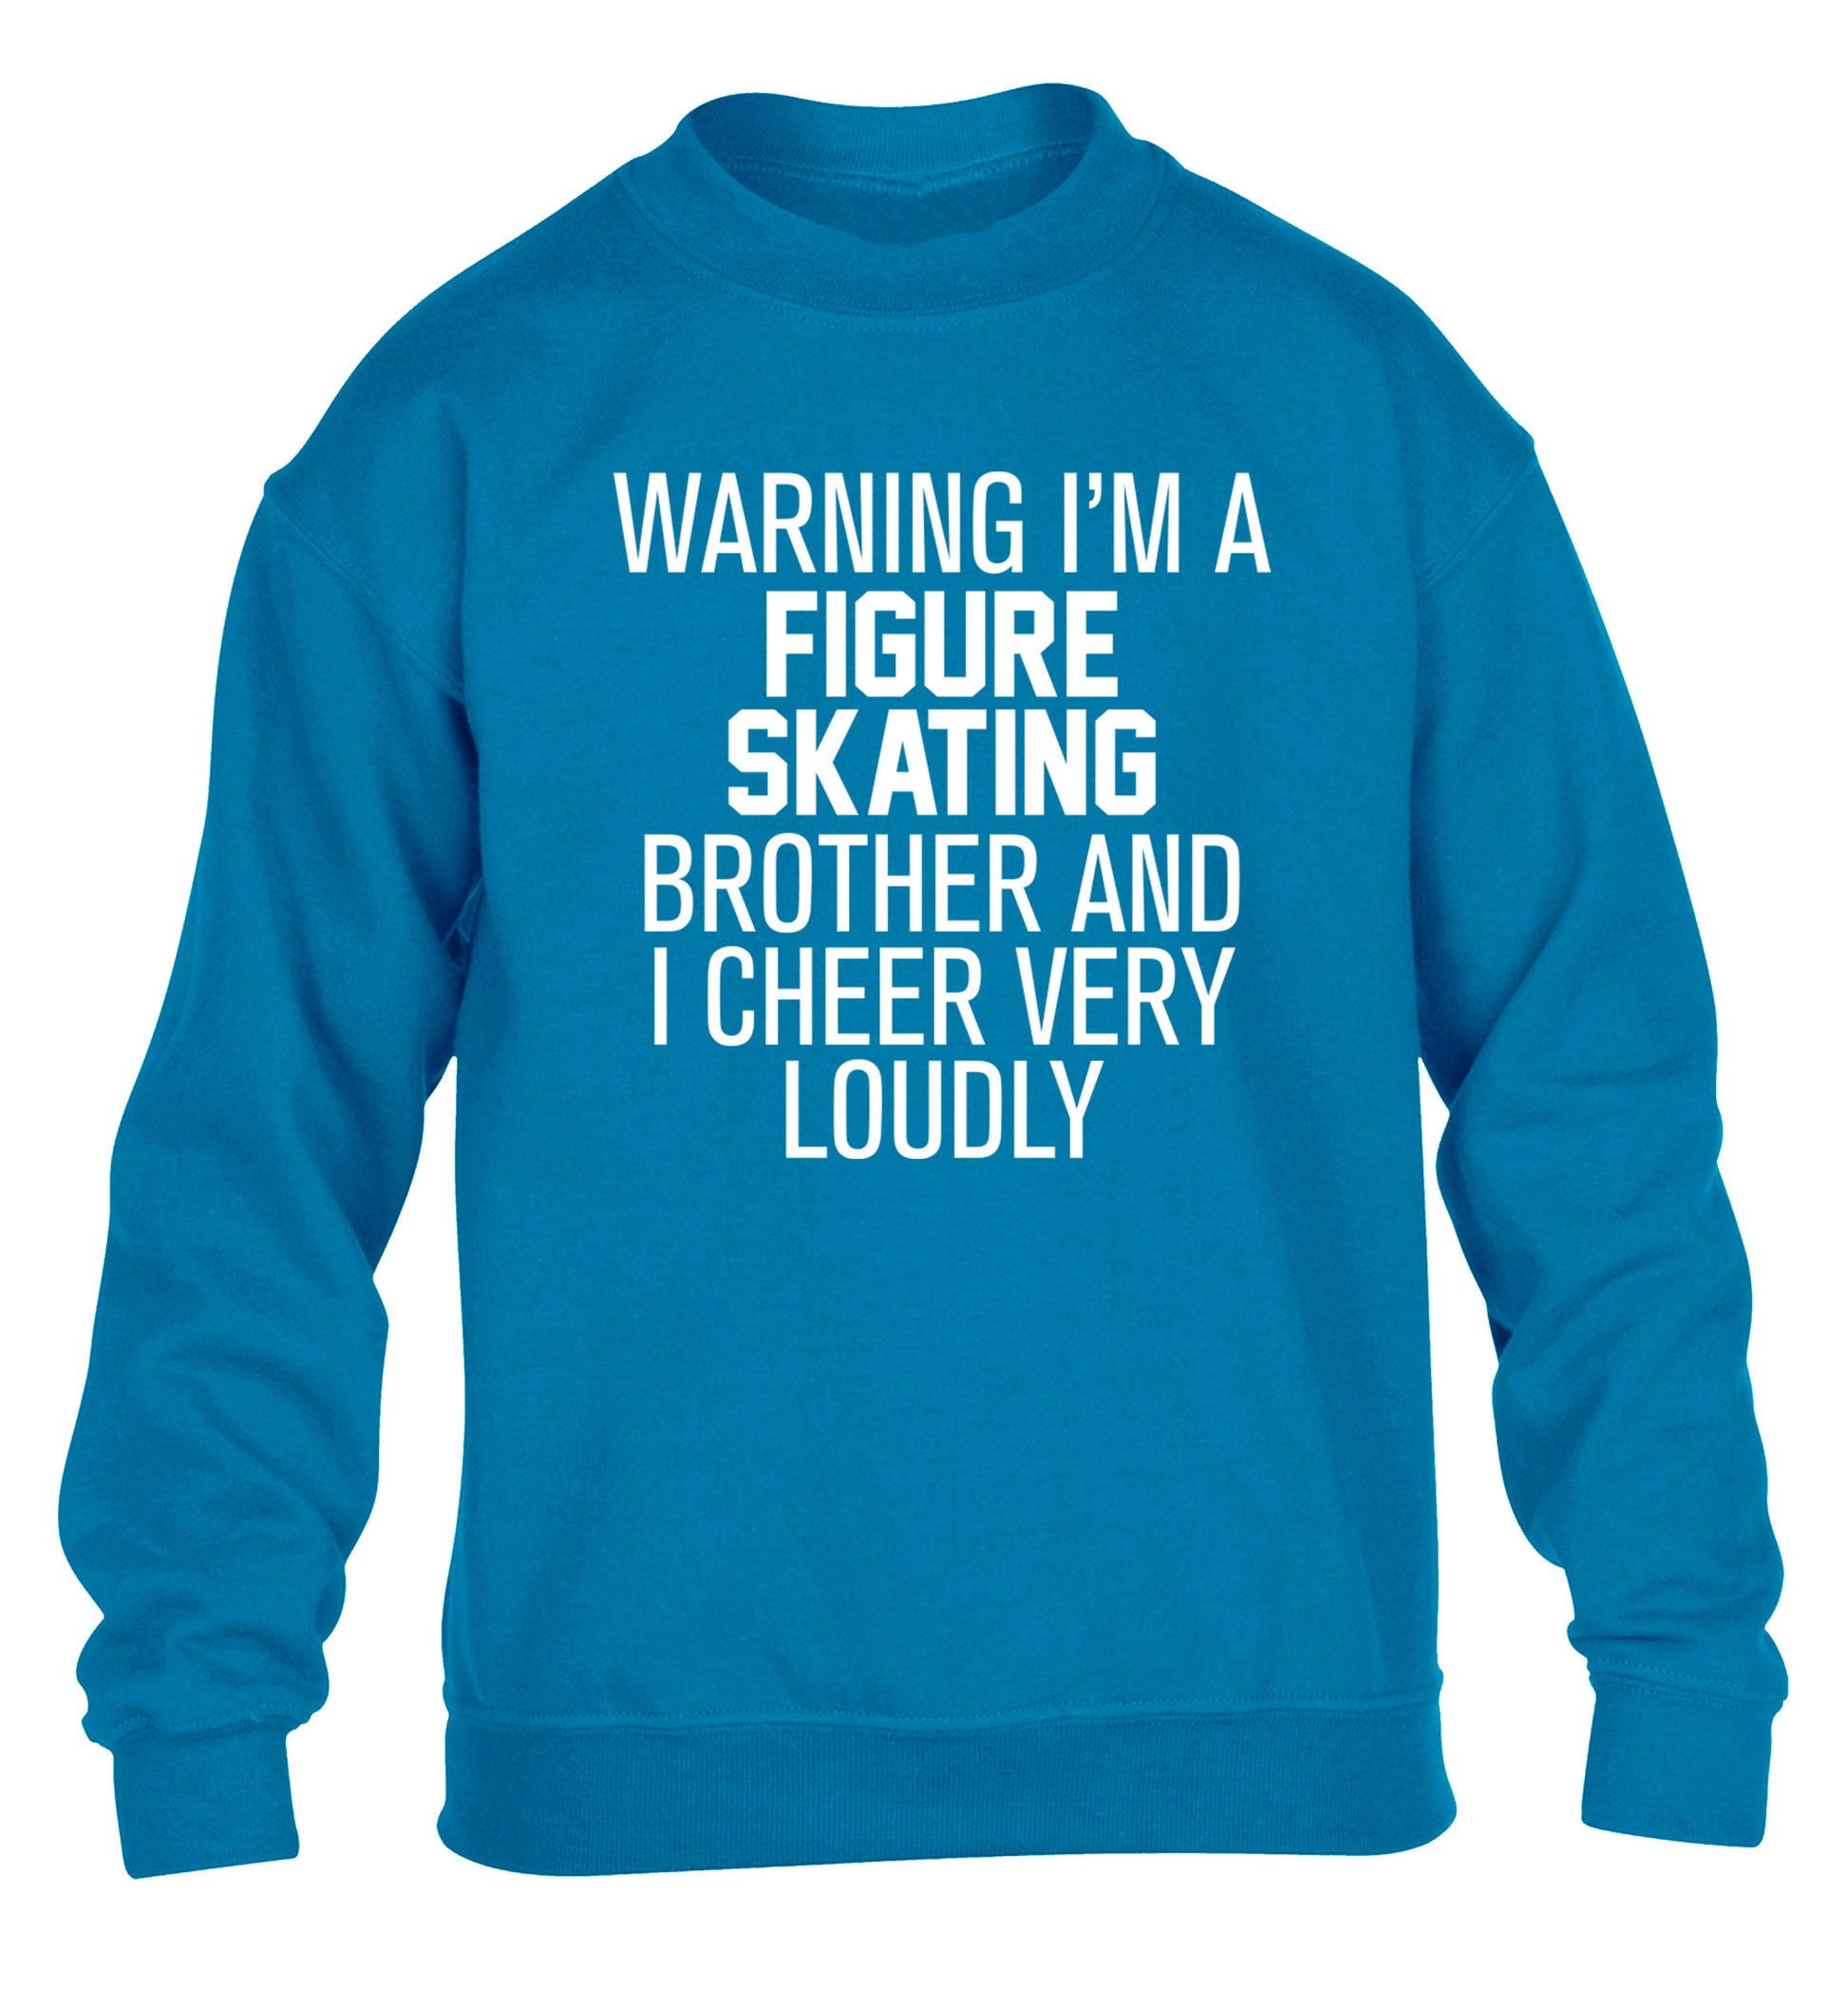 Warning I'm a figure skating brother and I cheer very loudly children's blue sweater 12-14 Years